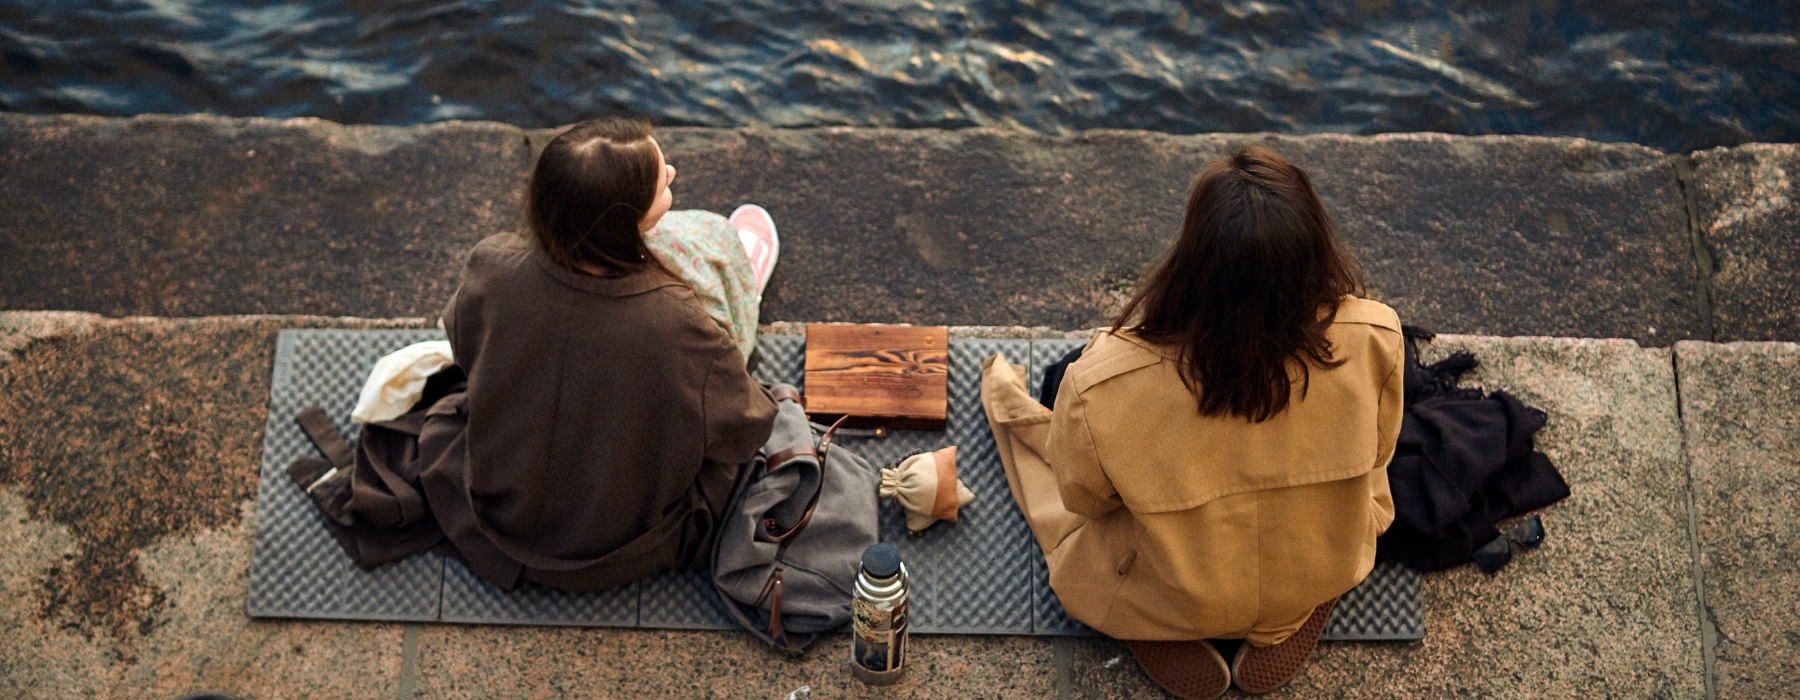 two women bundled up, sit next to the water on mats